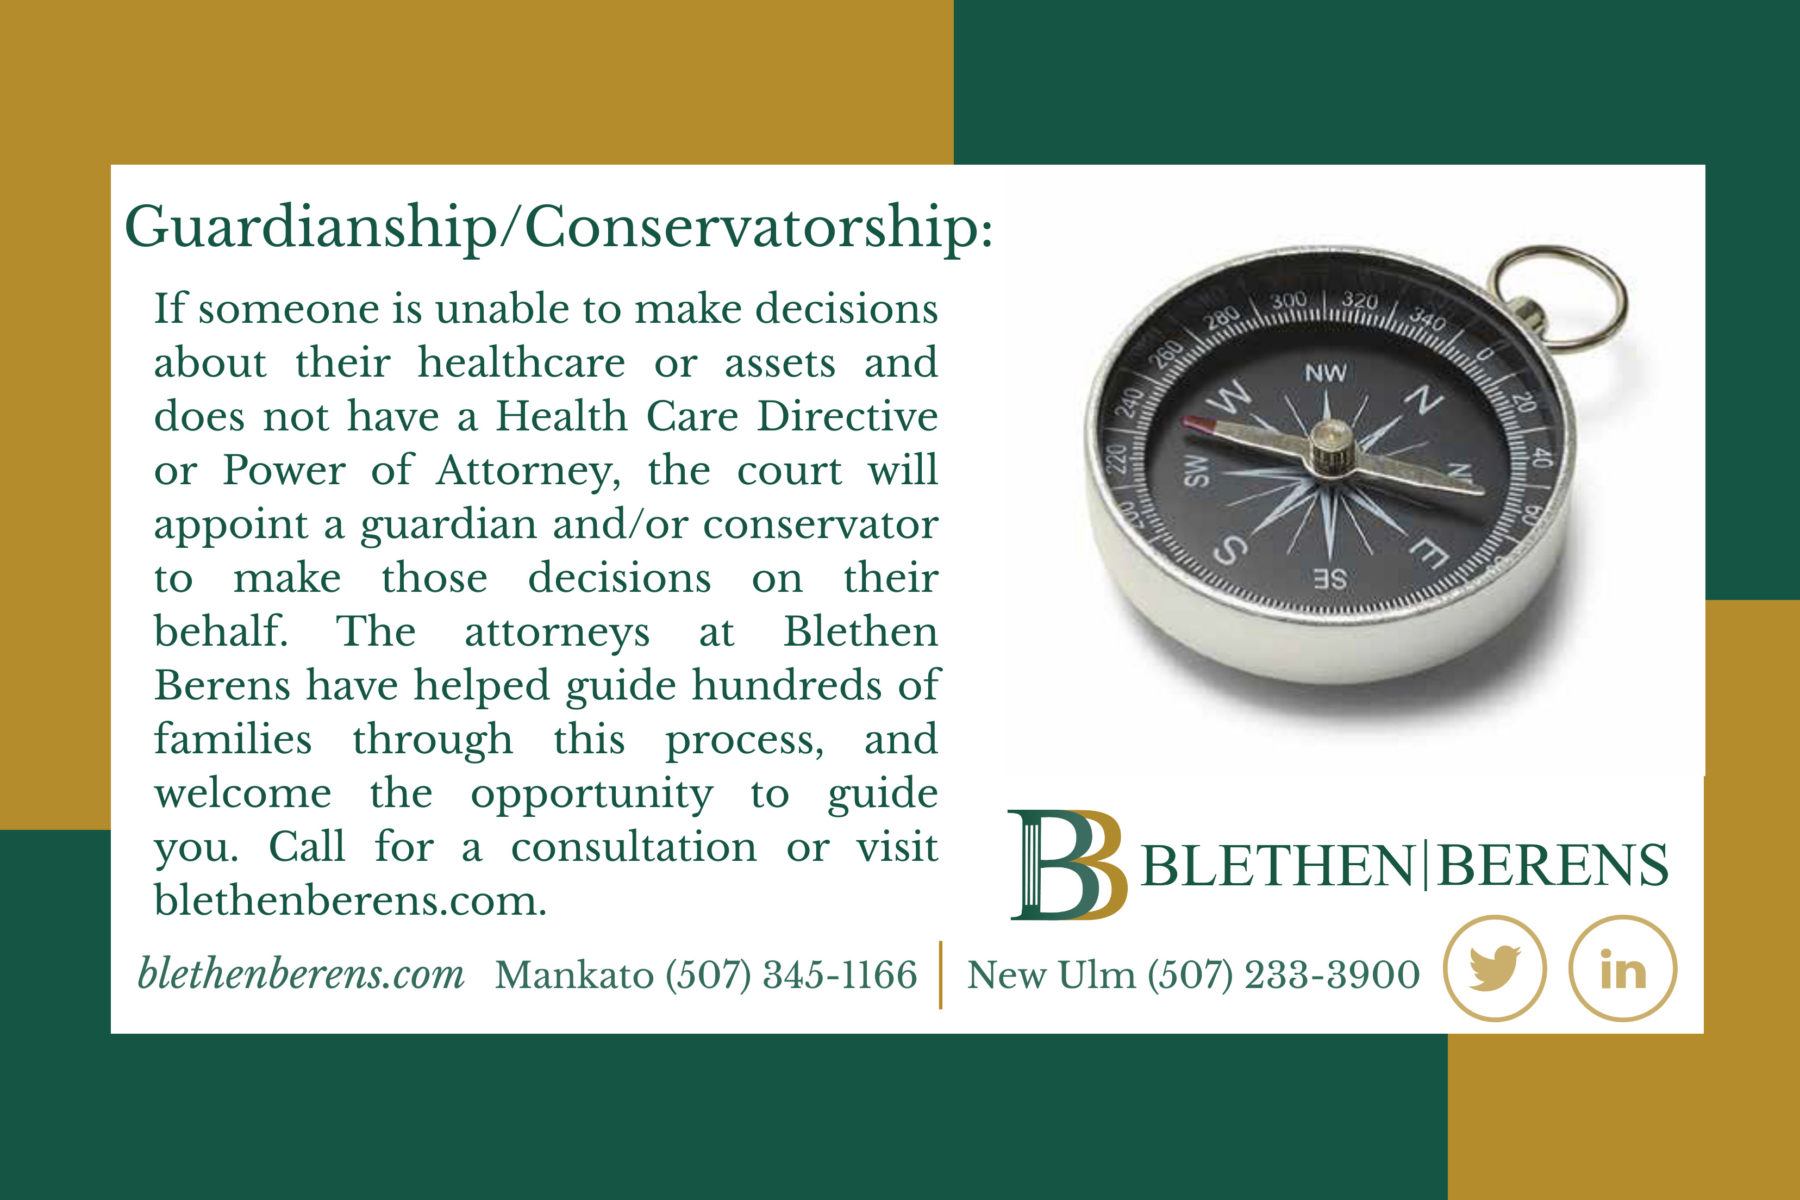 If someone is unable to make decisions about their healthecare or assets and does not have a Helath Care Directive or Power of Attorney, the court will appoint a guardian and/or conservator to make those decisions on their behalf. The attorneys at Blethen Berens have helped guide hundred of families through this process, and welcome the opportunity to guide you. Call for a consultation or visit blethenberens.com